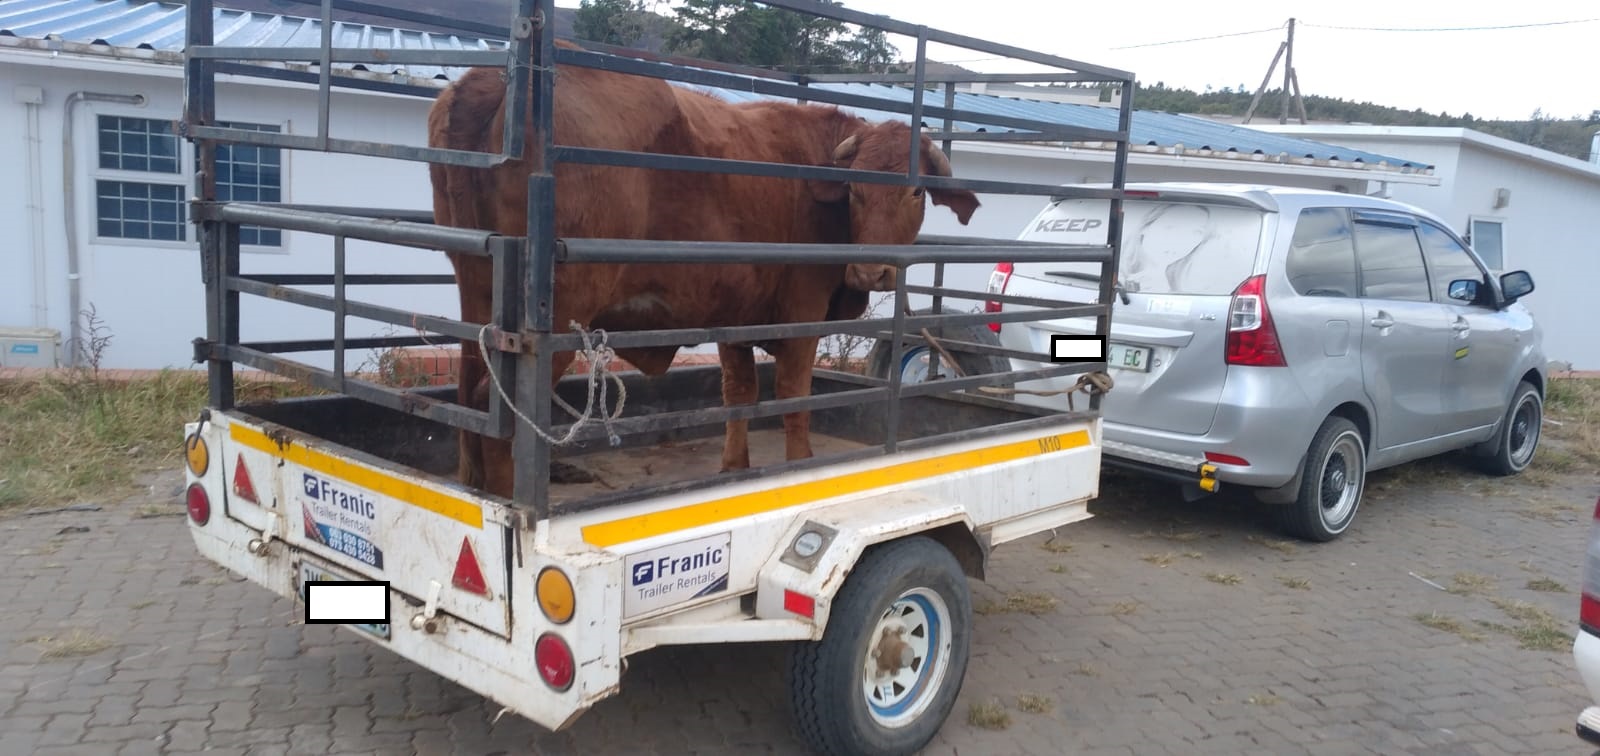 Suspects nabbed in possession of livestock